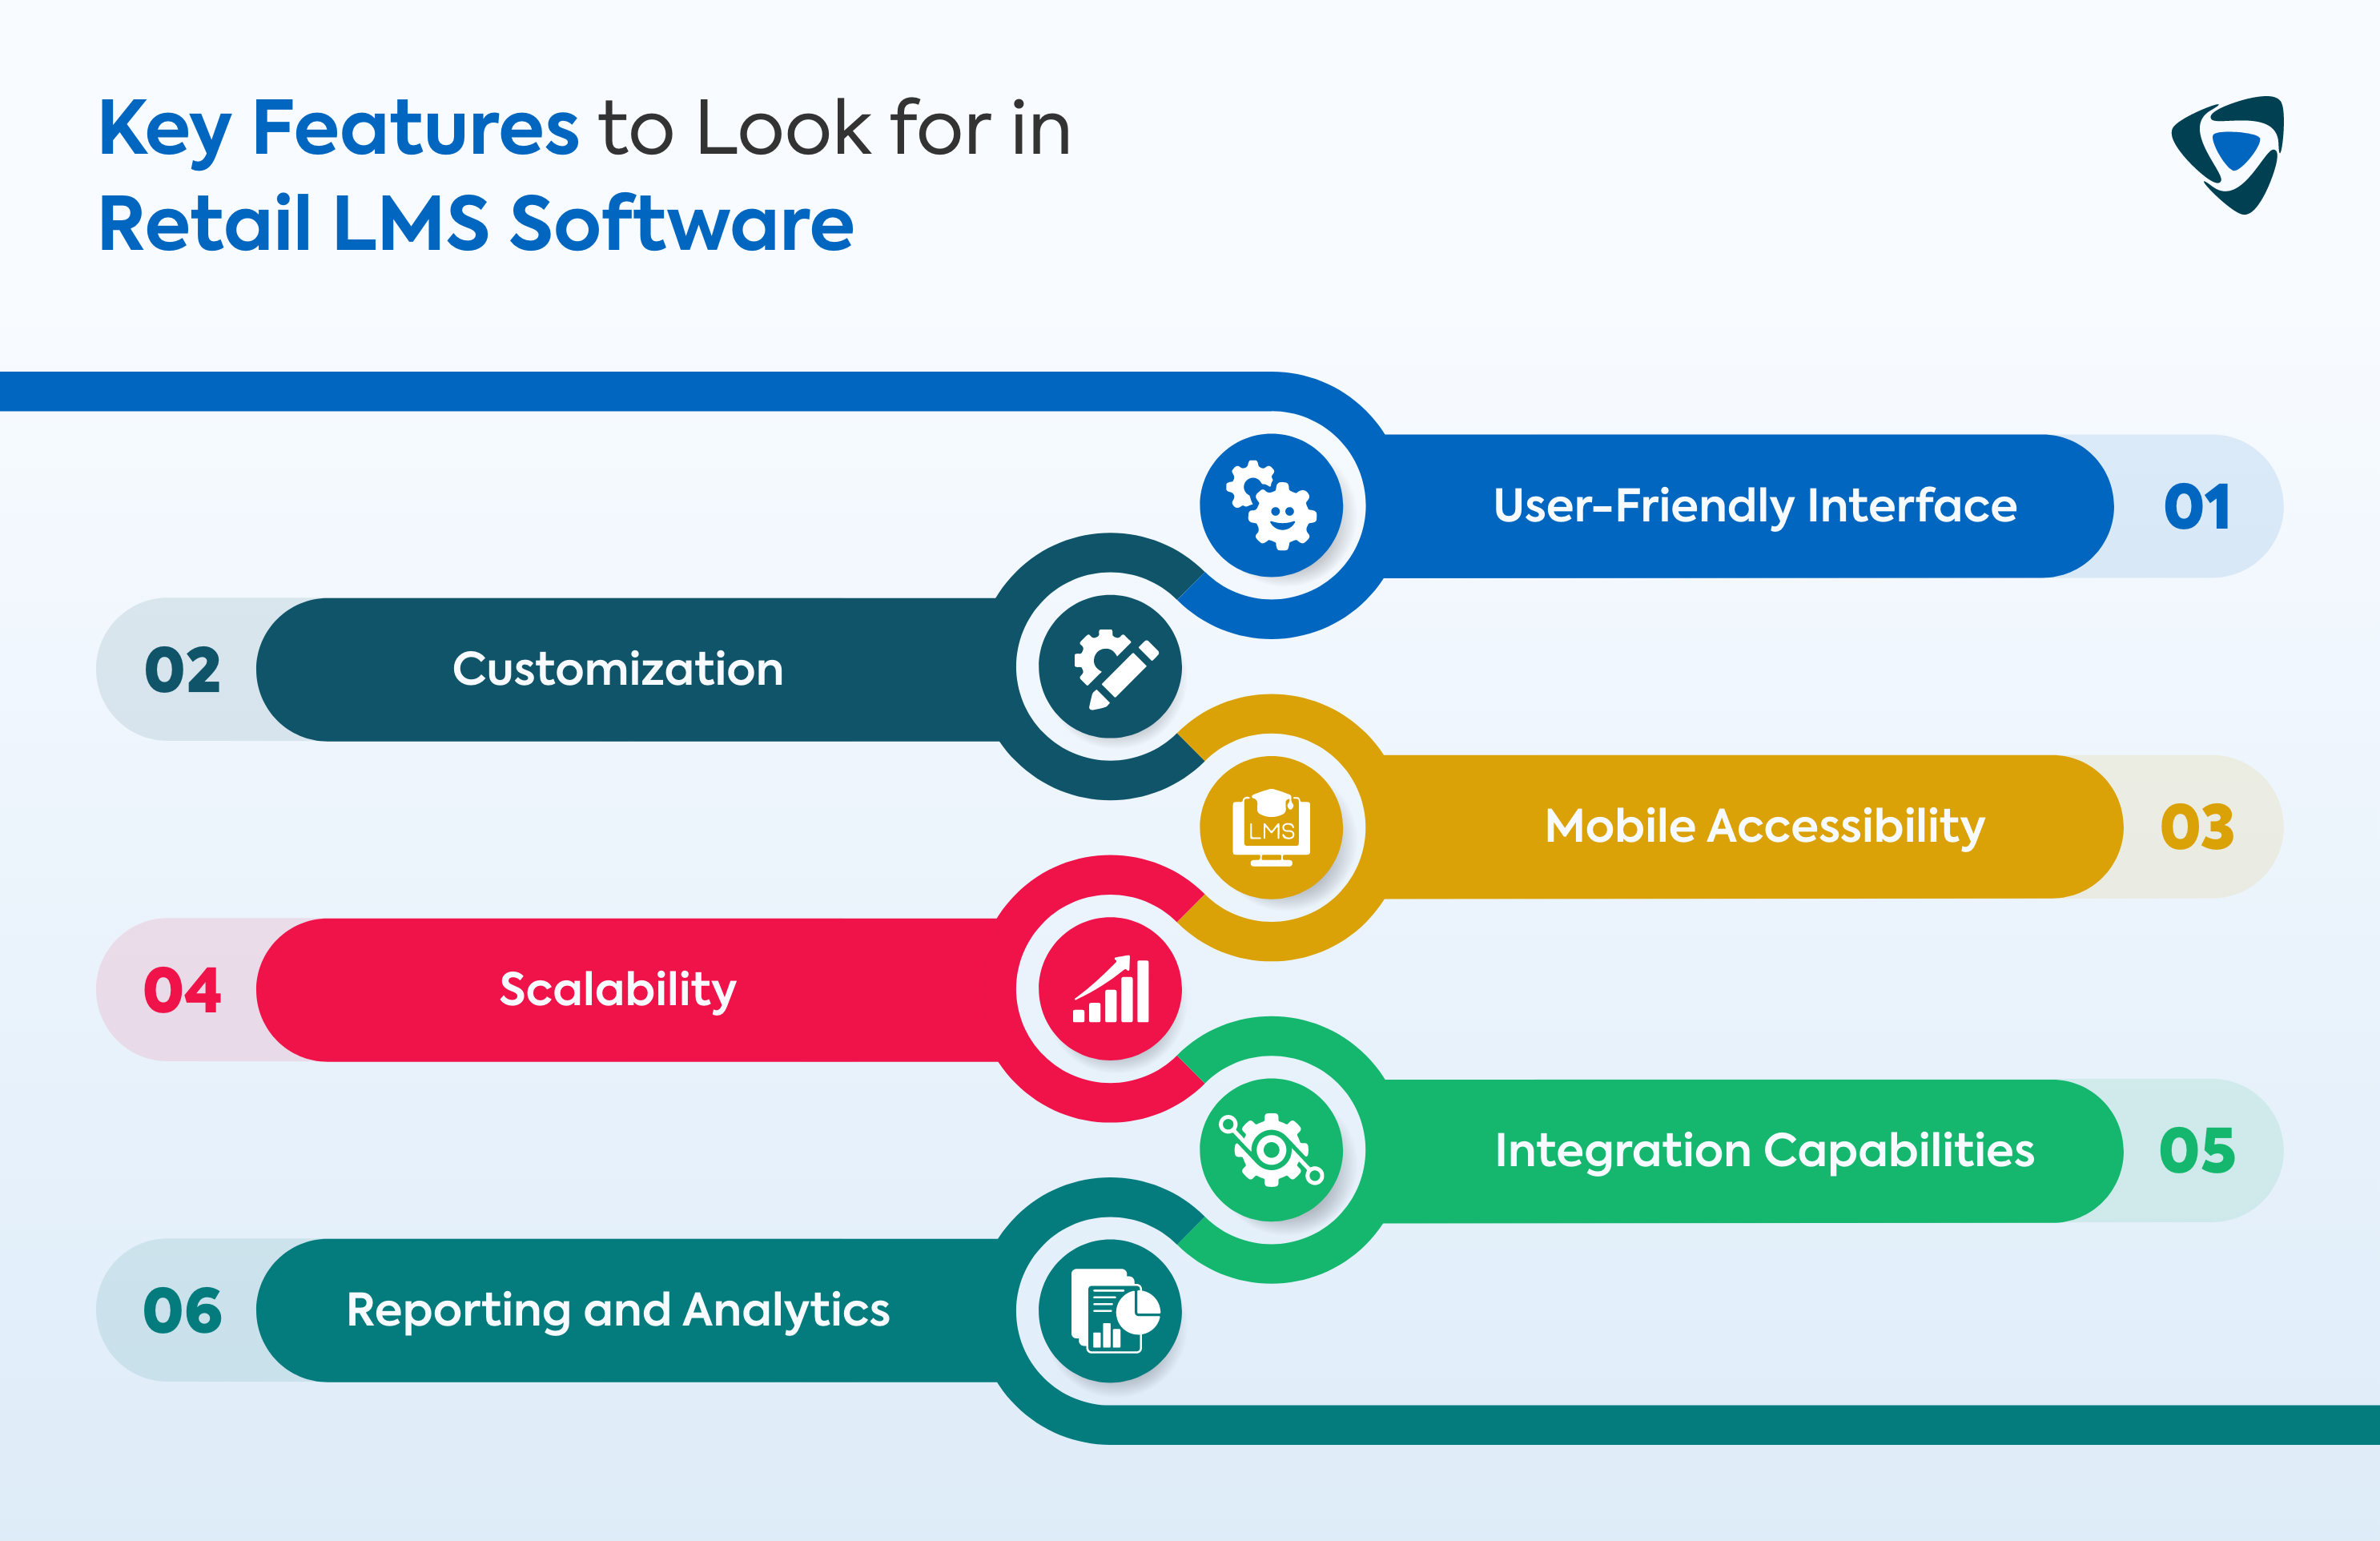 Key Features to Look for in Retail LMS Software